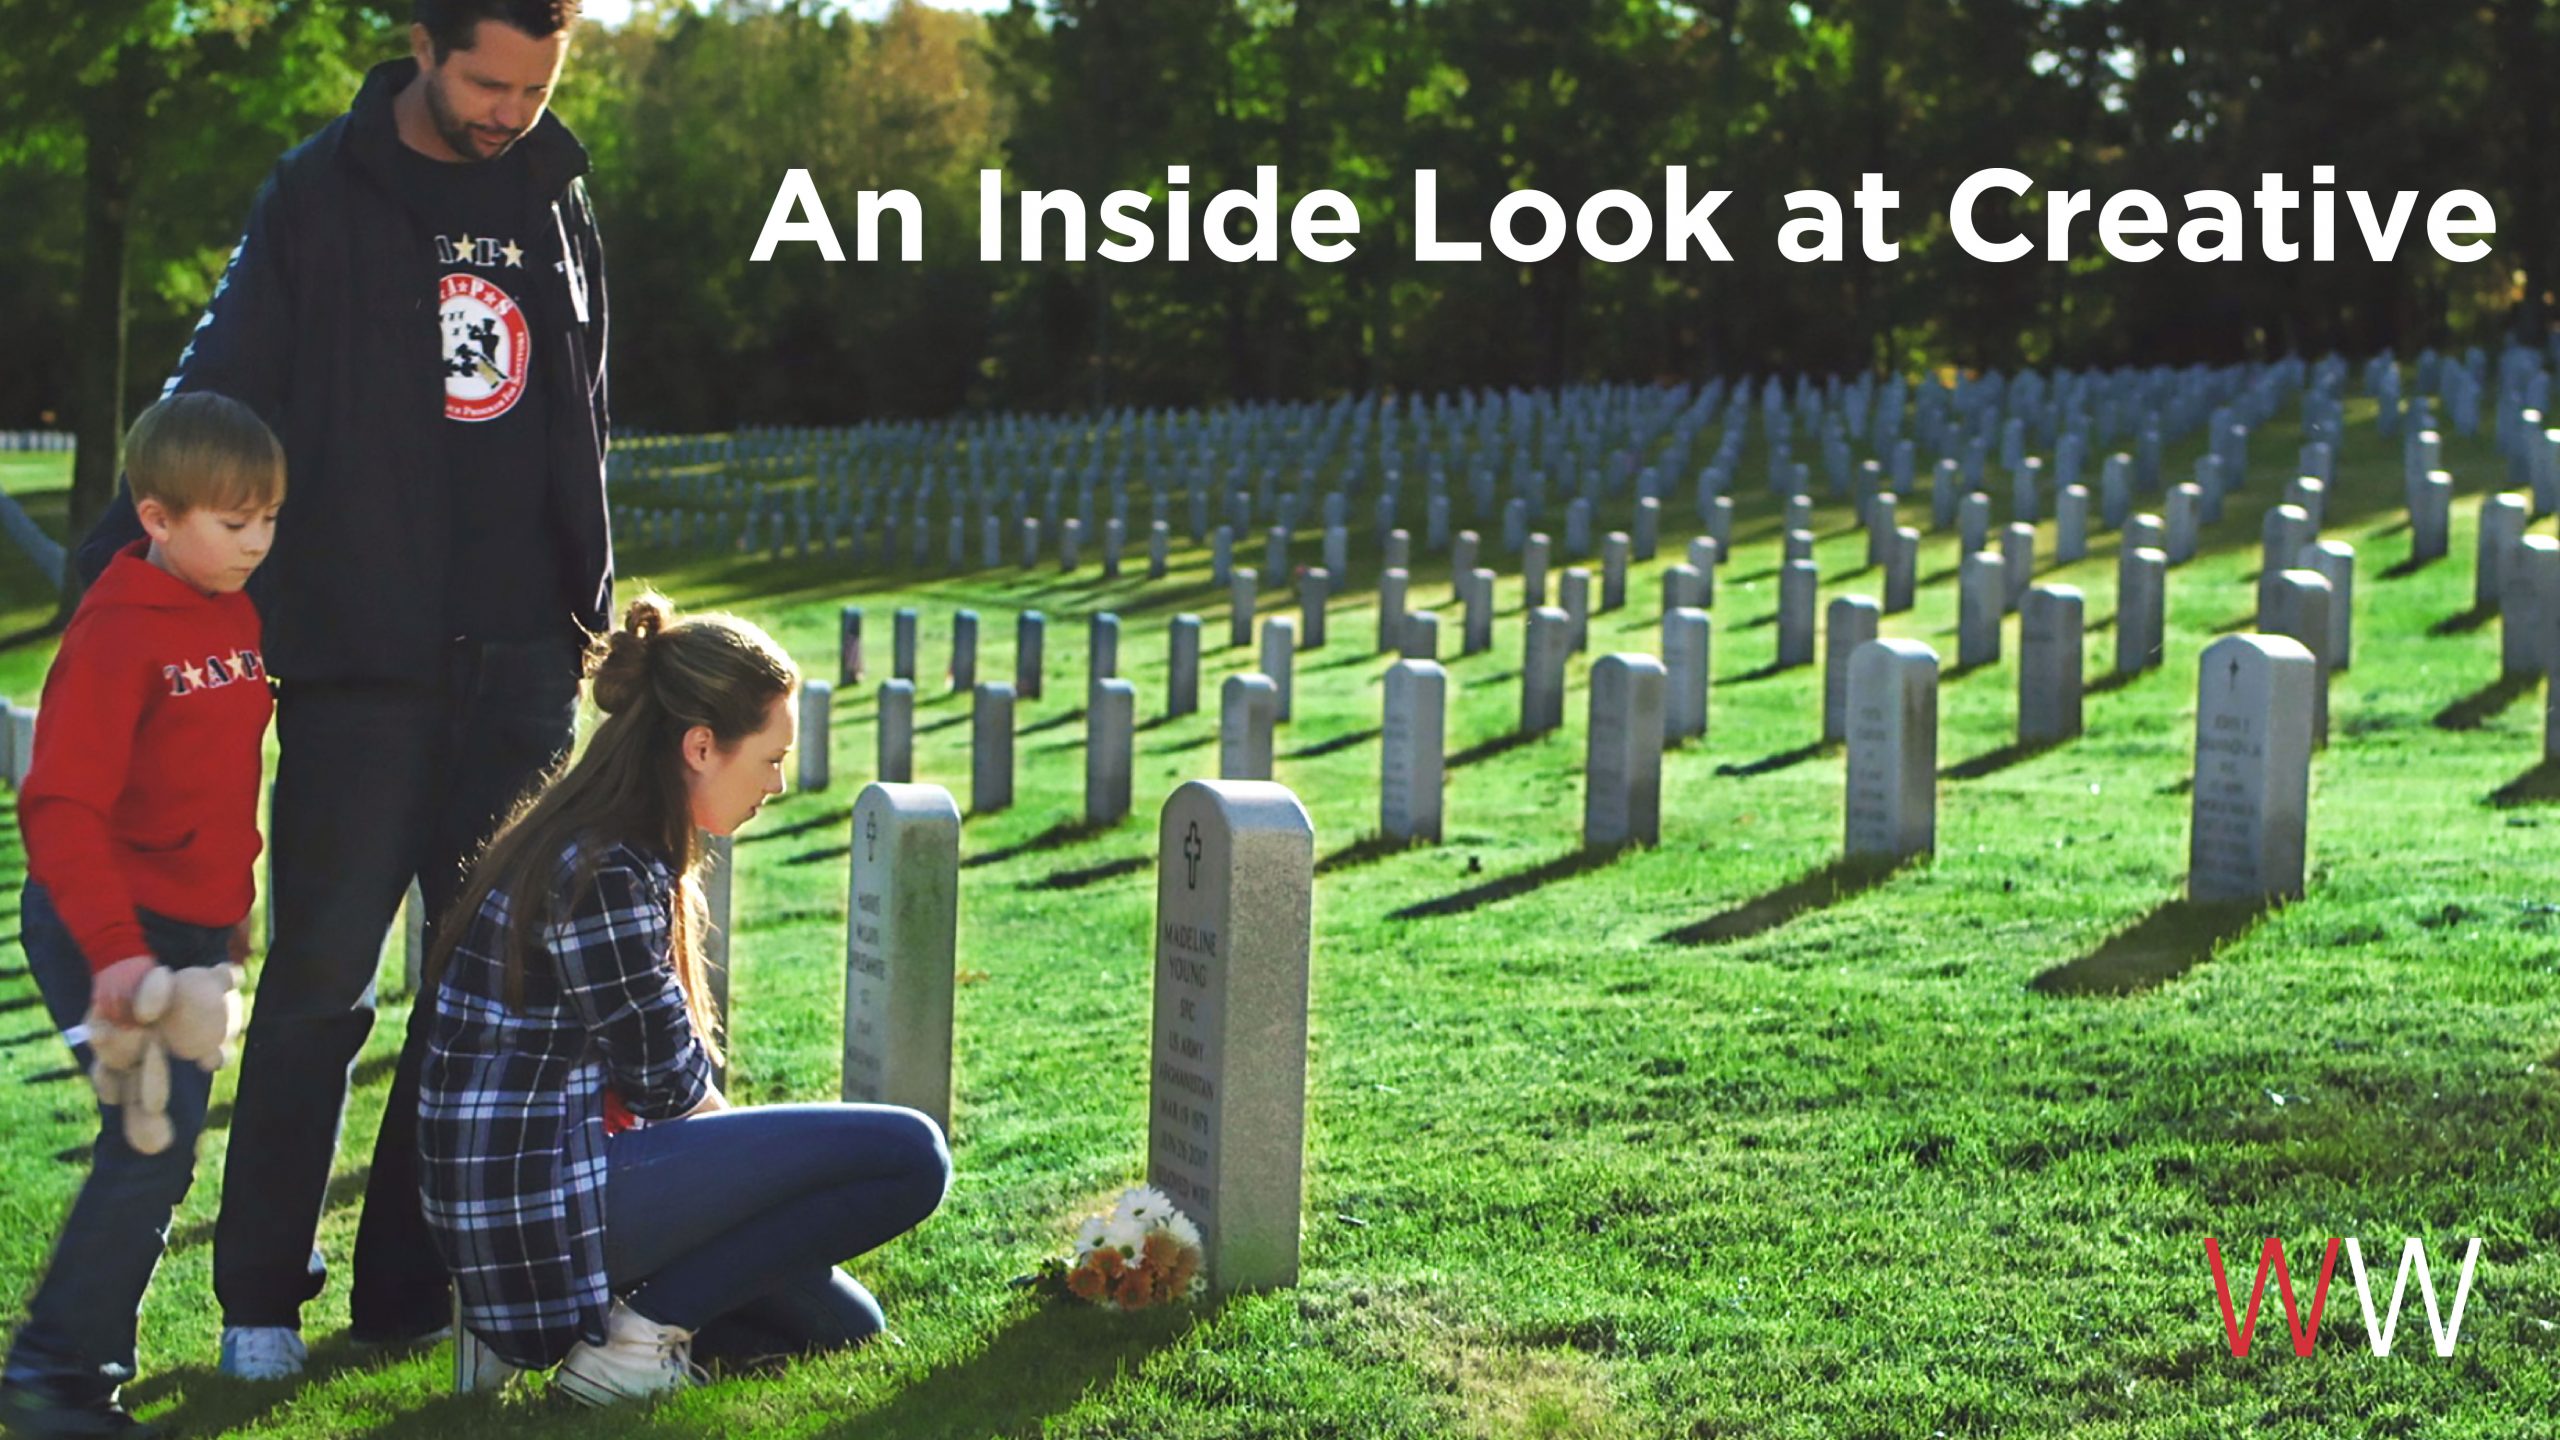 Man, girl and little boy at a gravesite in a cemetary. The text laid over the image reads "An inside look at creative."